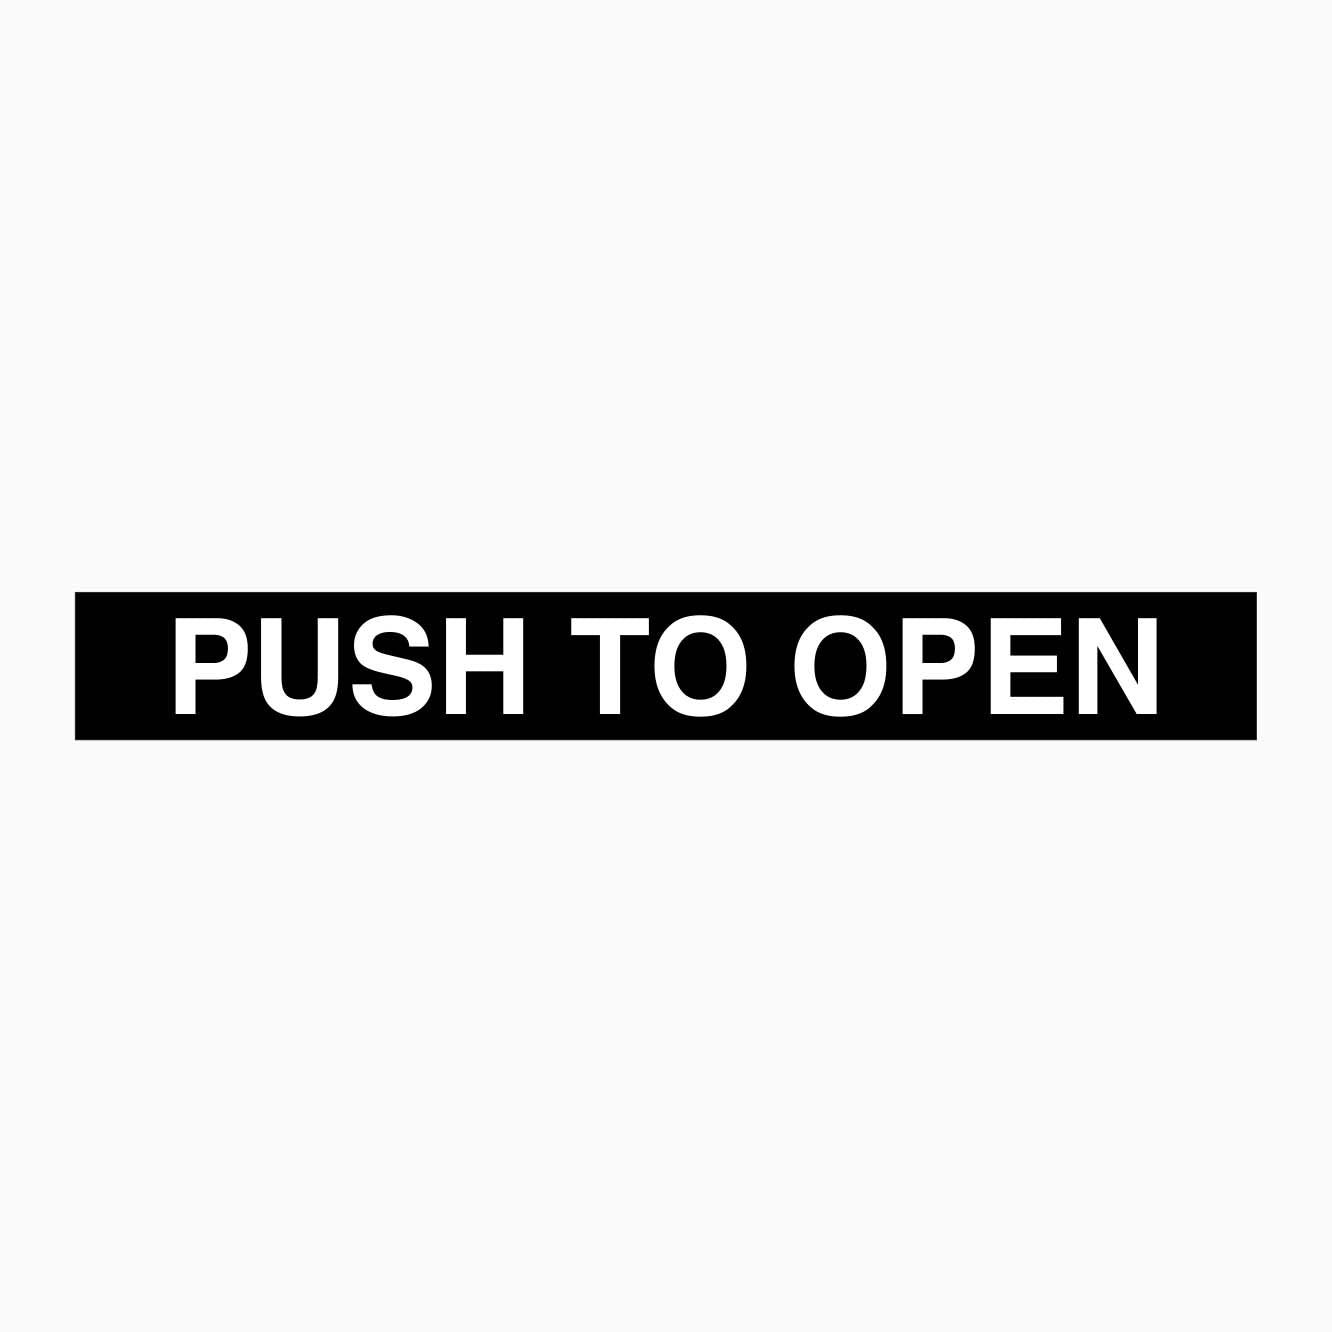 PUSH TO OPEN SIGN - BLACK BACKGROUND - GET SIGNS